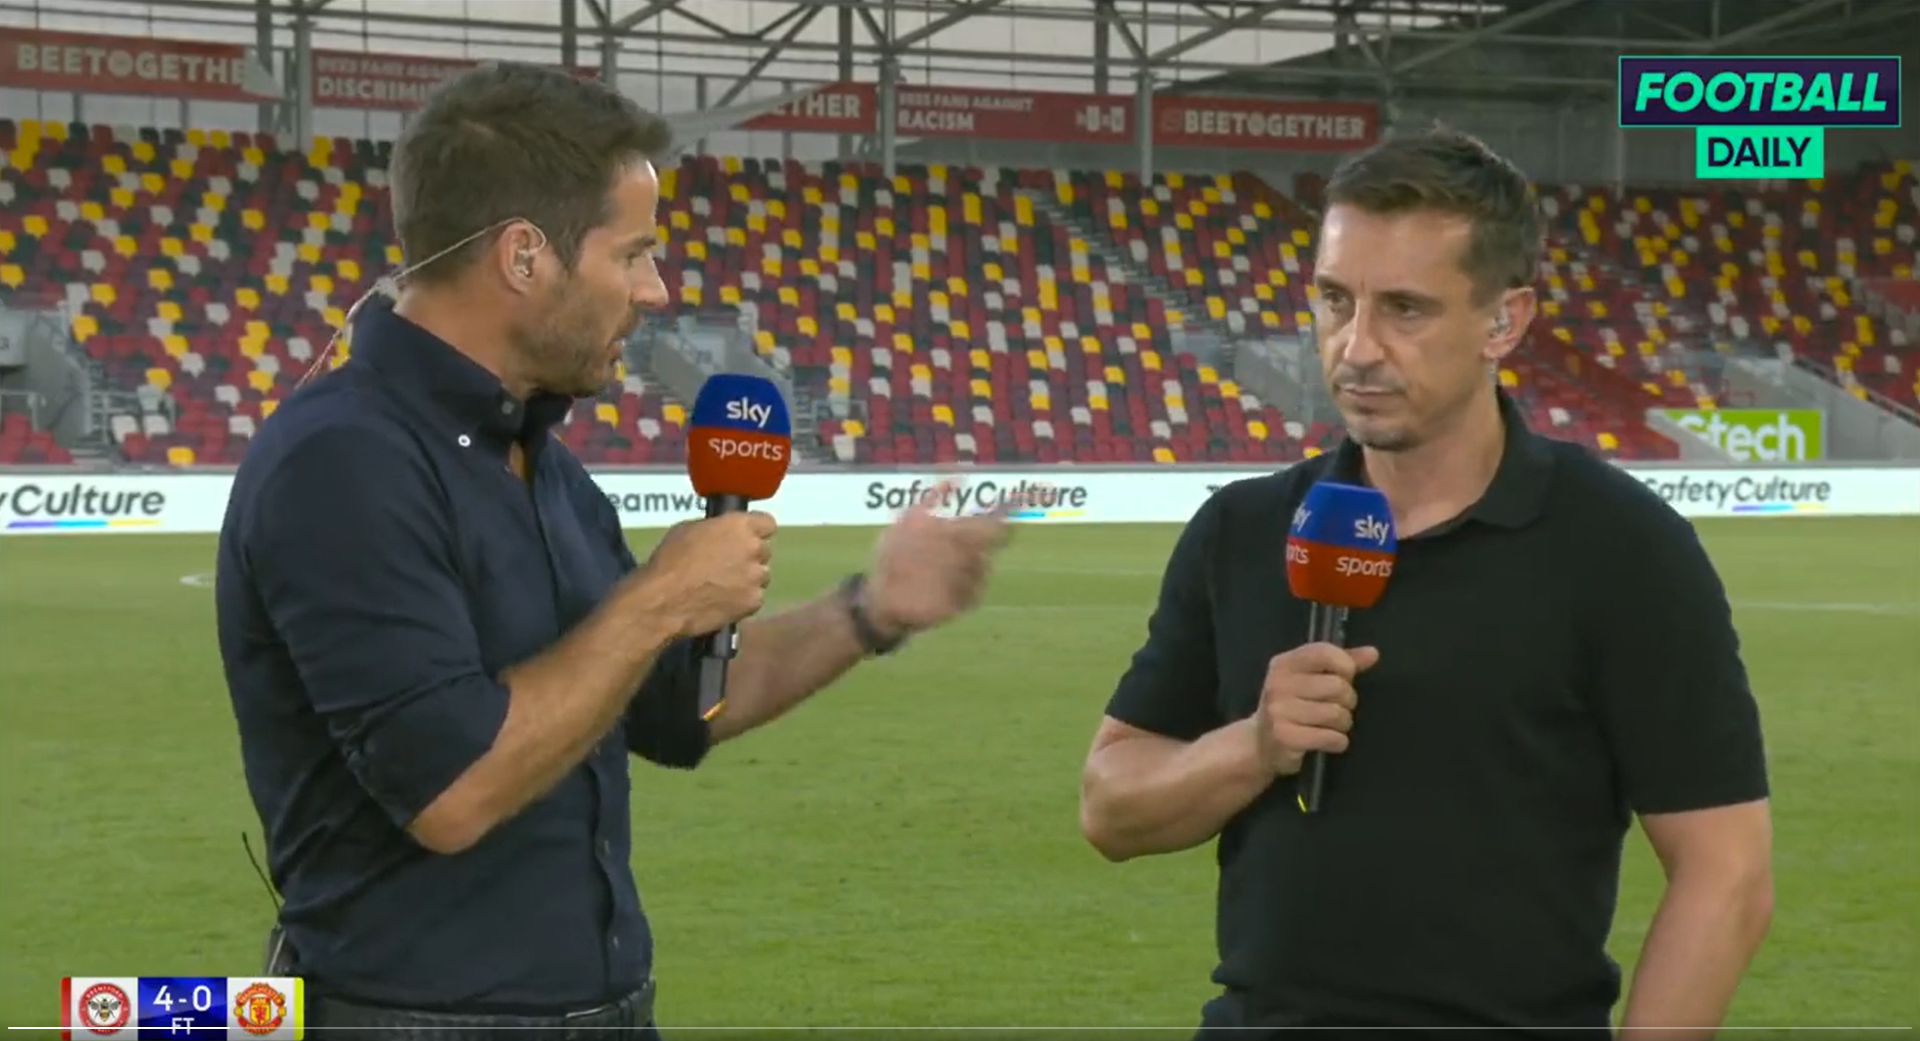 Jamie Redknapp and Gary Neville clashed after Brentford 4-0 Man Utd